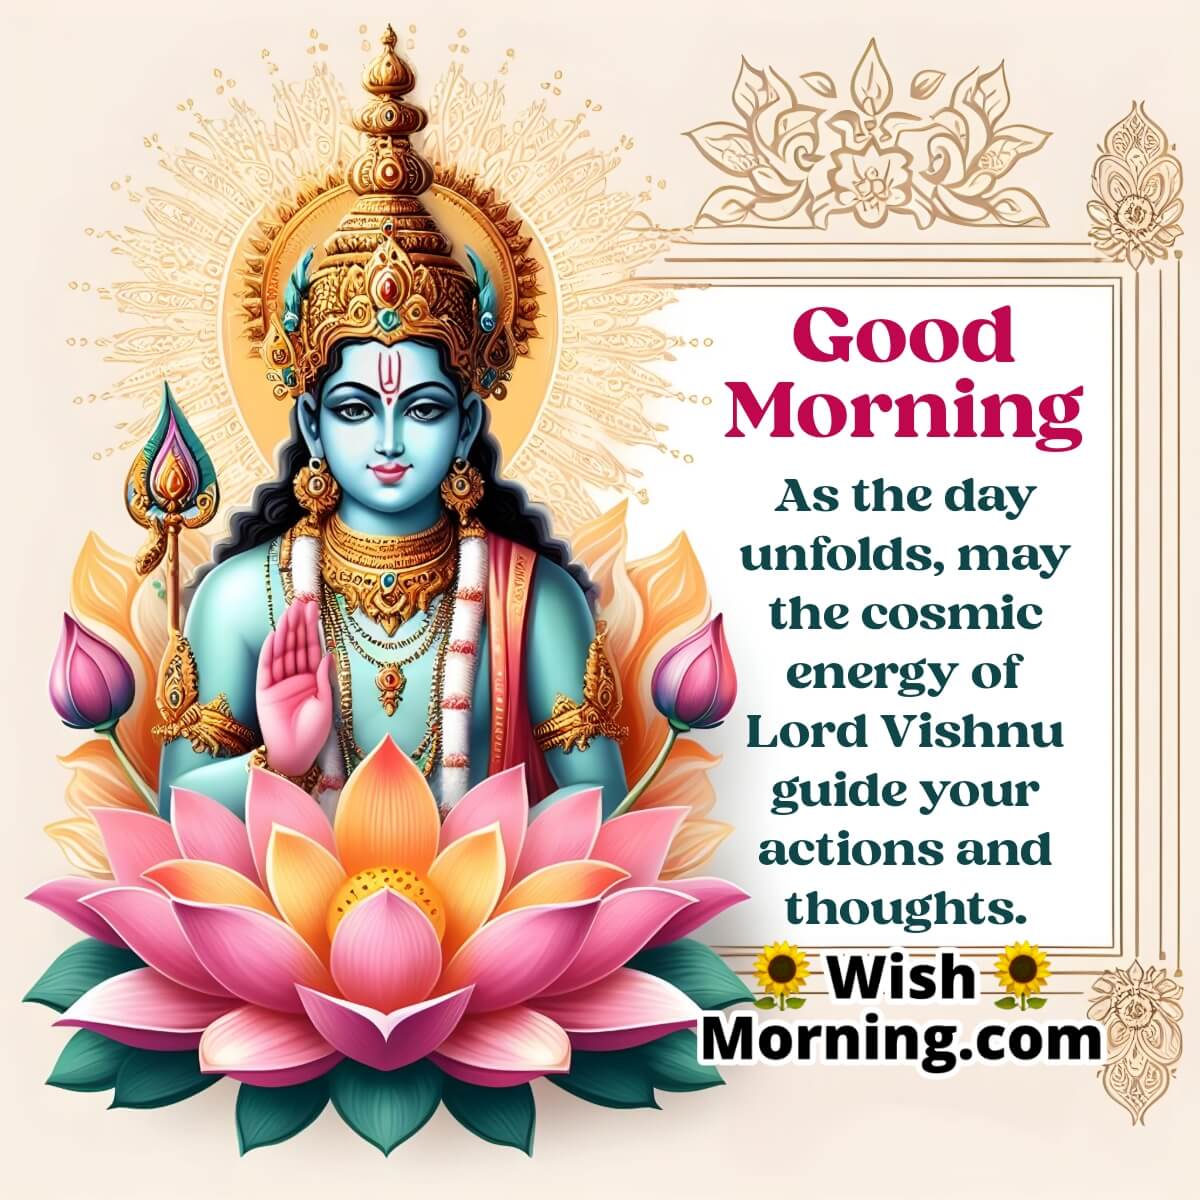 Start Your Day With Lord Vishnu's Blessings